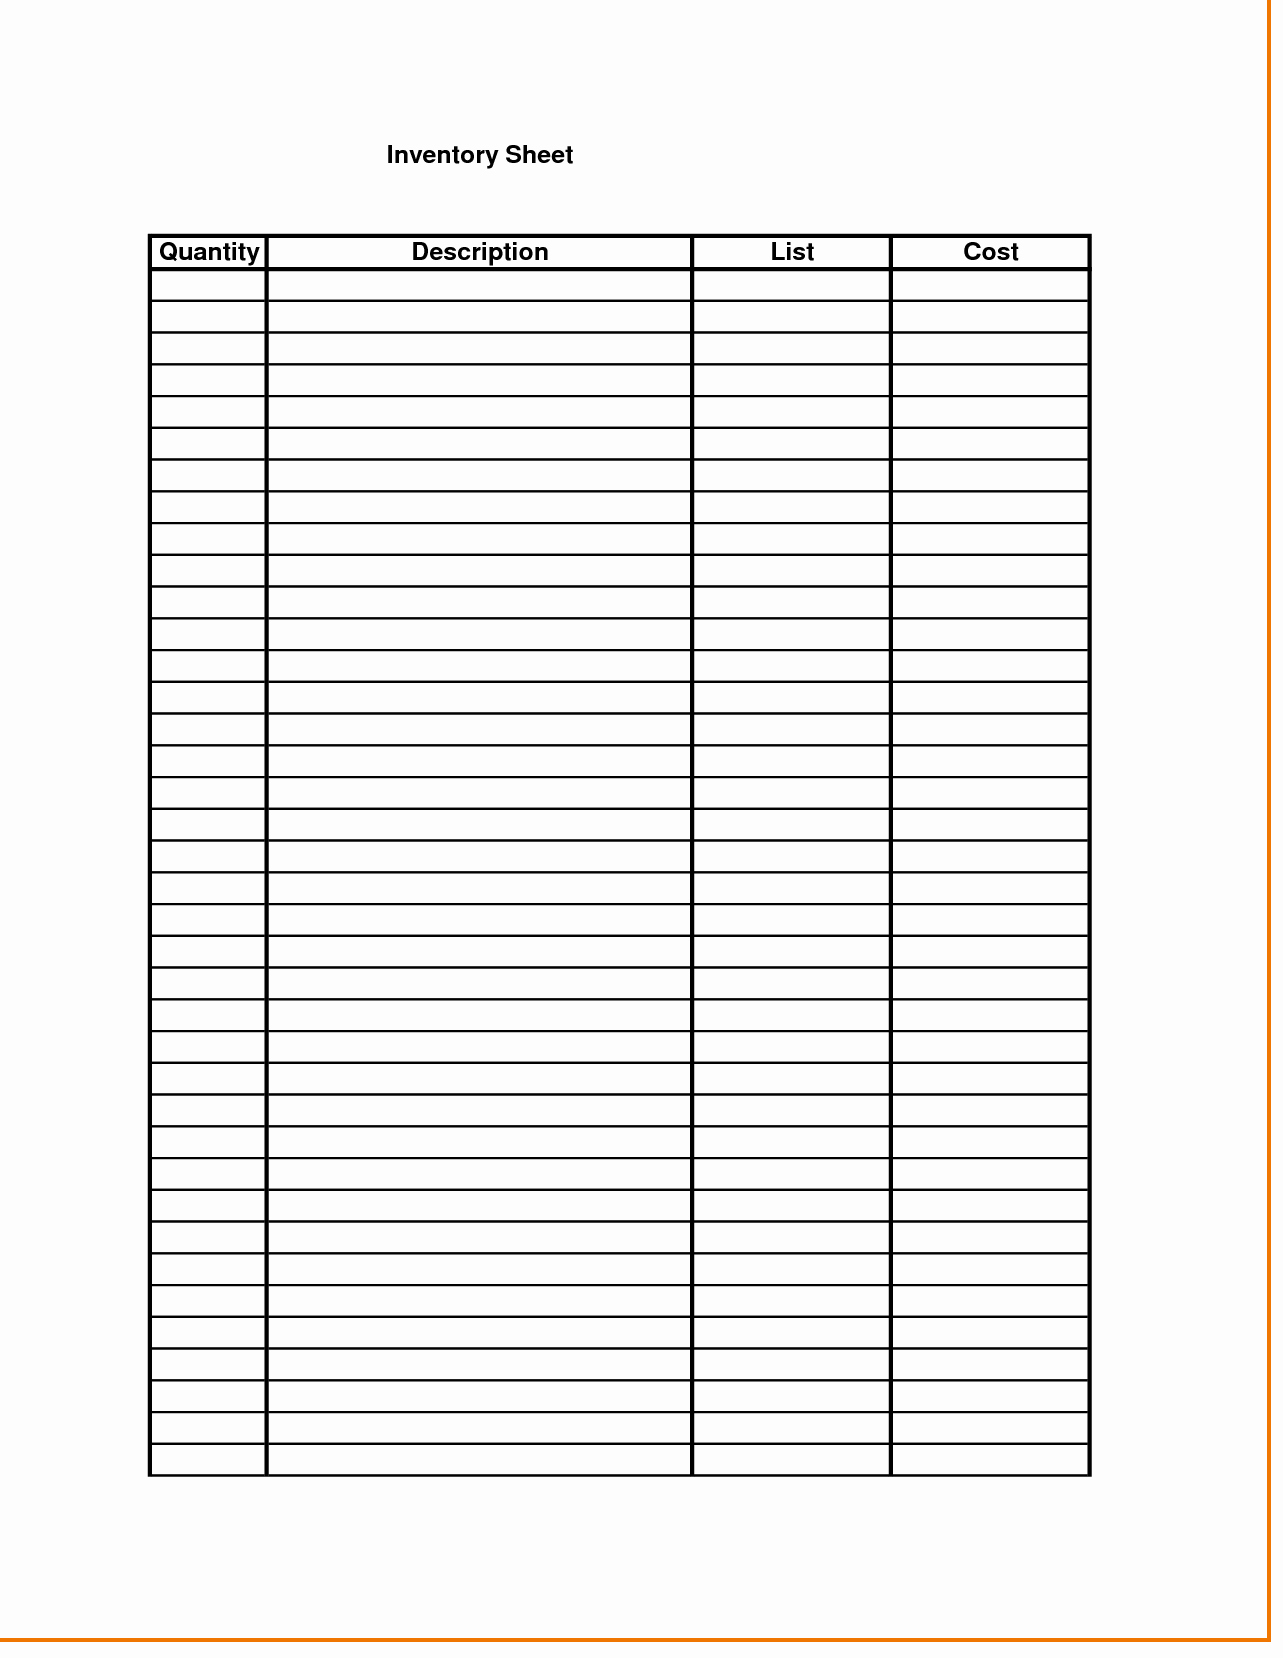 Inventory Control Spreadsheet Template Free Beautiful Inventory Control Template with Count Sheet 1 Inventory